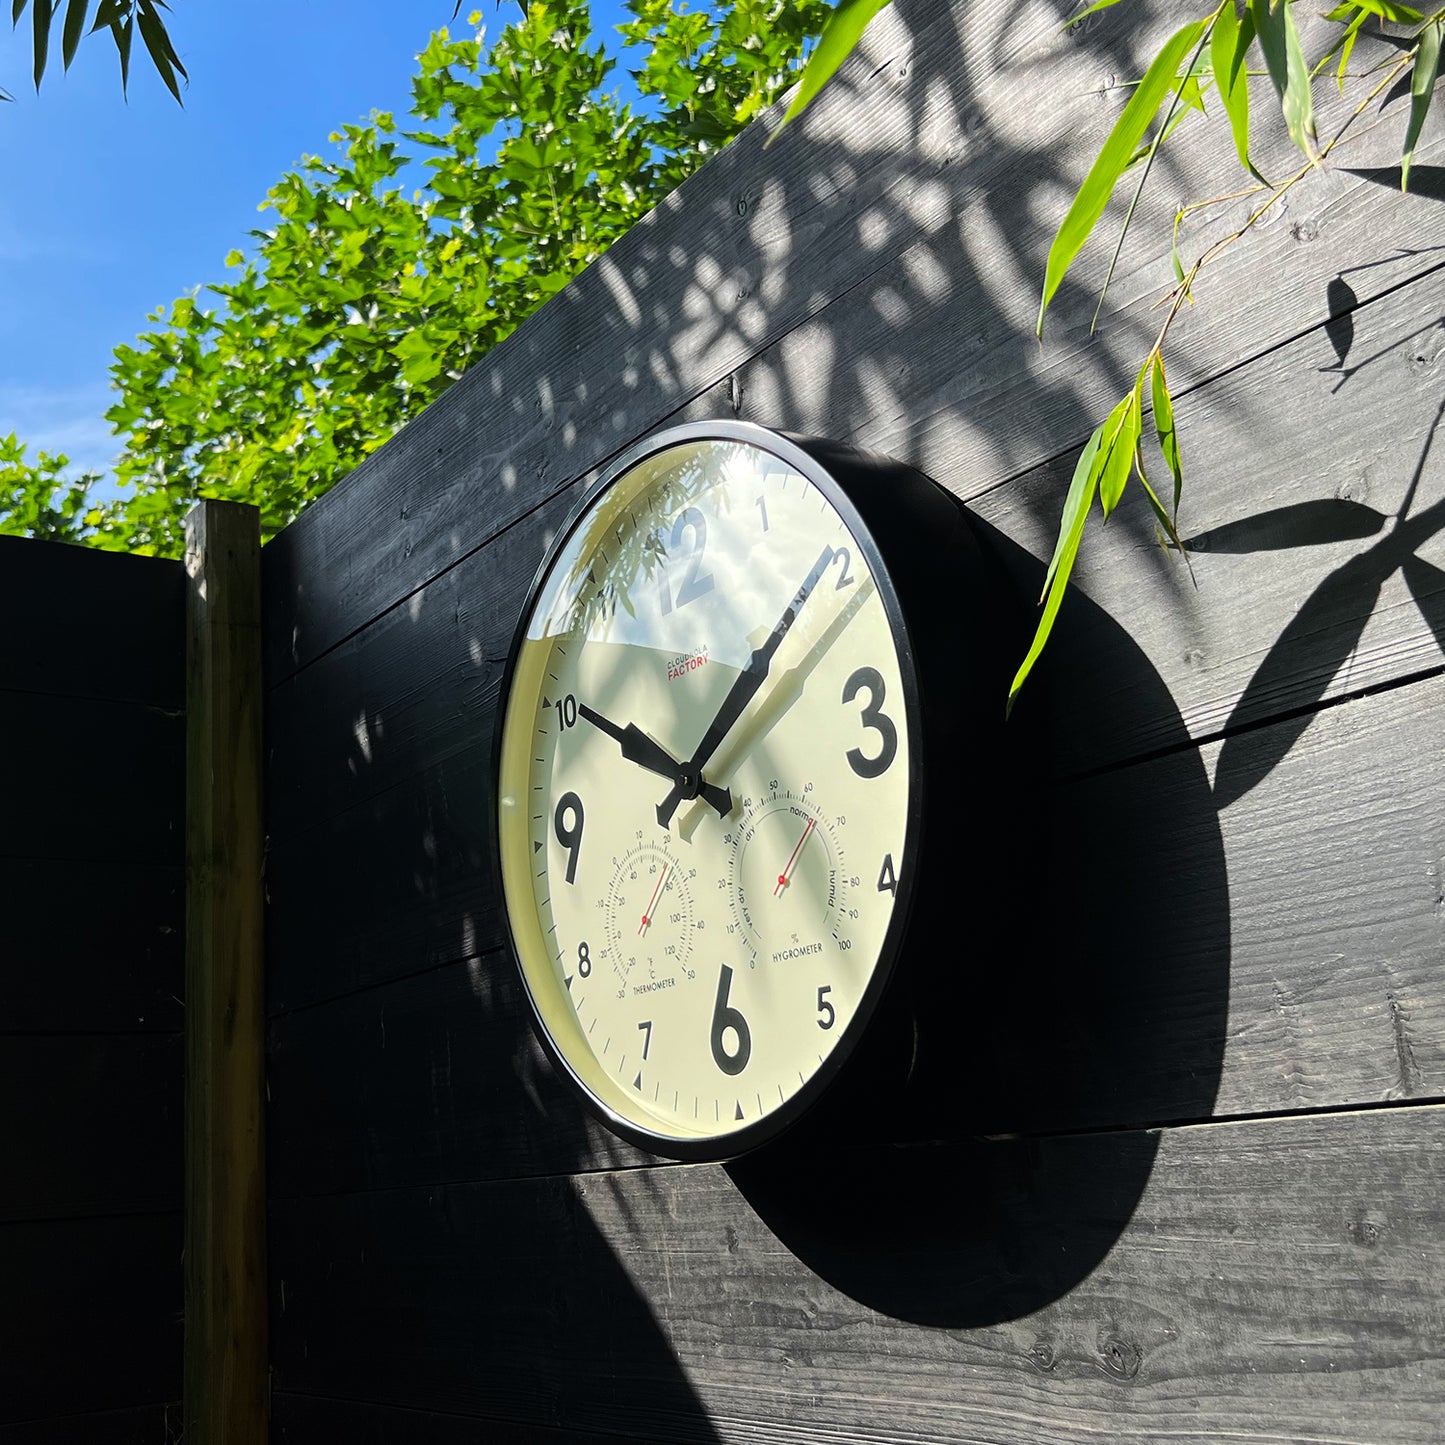 Factory Outdoor XL Black Wall Clock - Expansive Weather Station with Barometer & Temperature